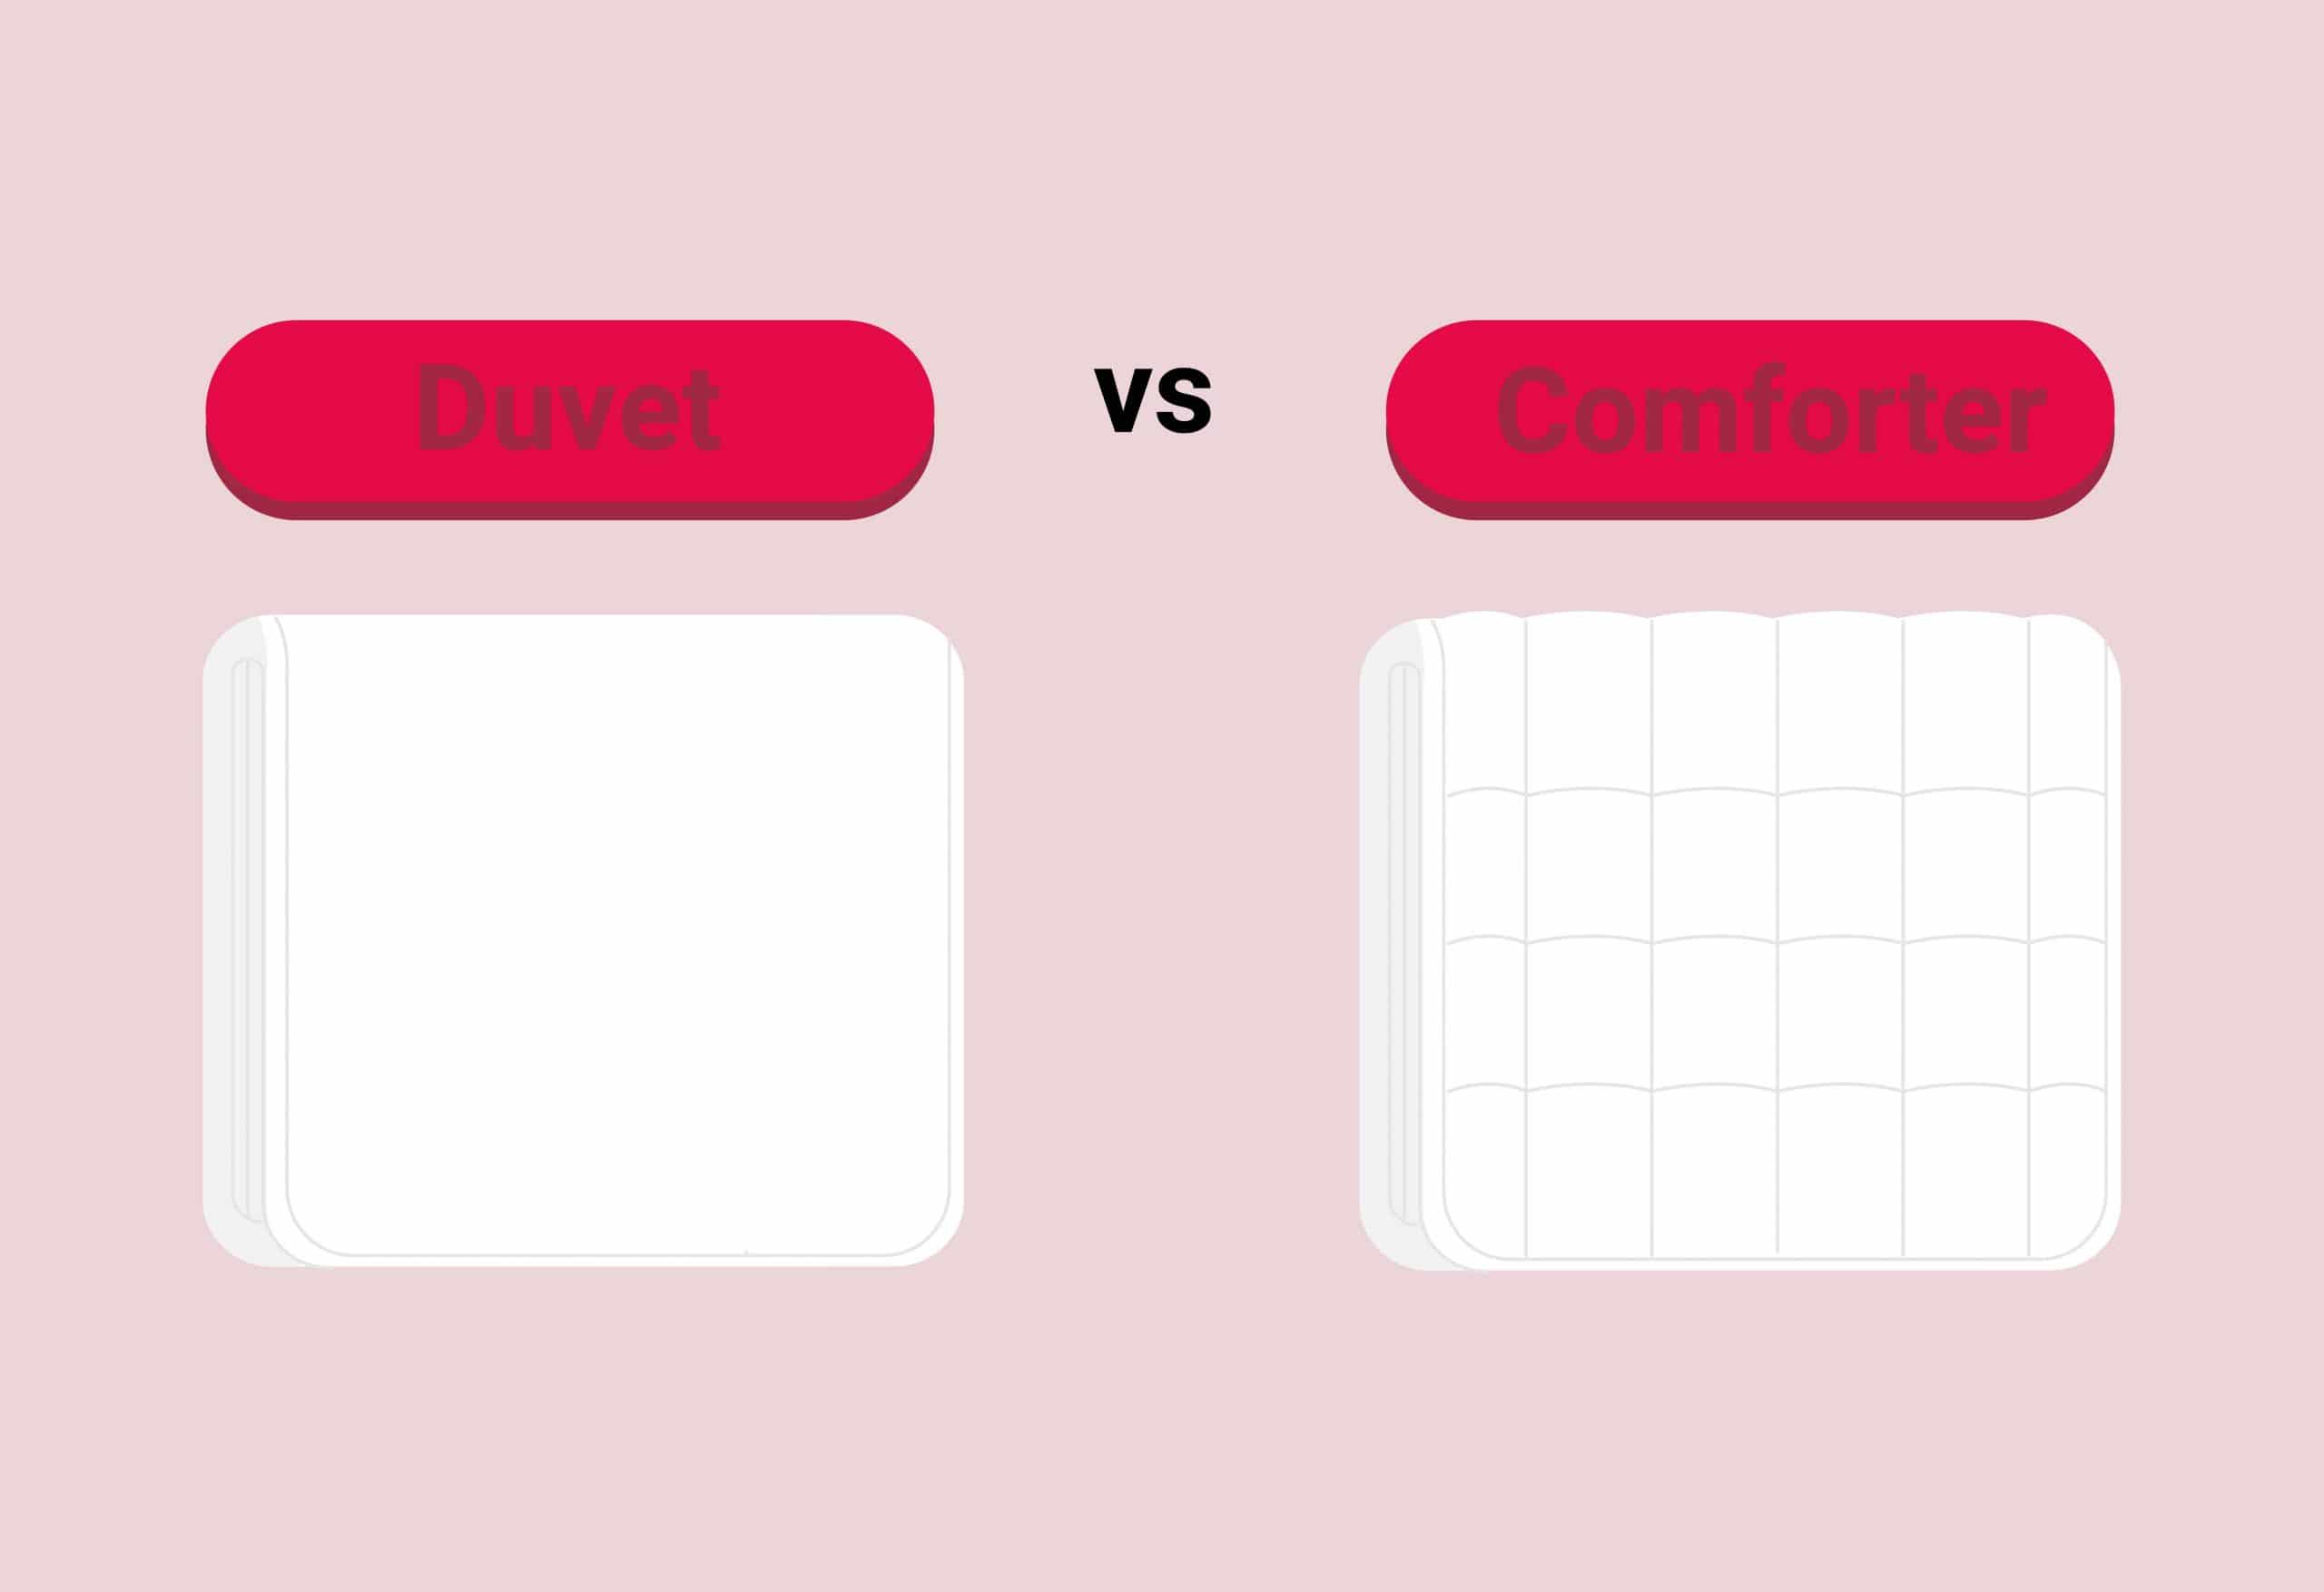 Duvet vs Comforter – What’s the Difference?